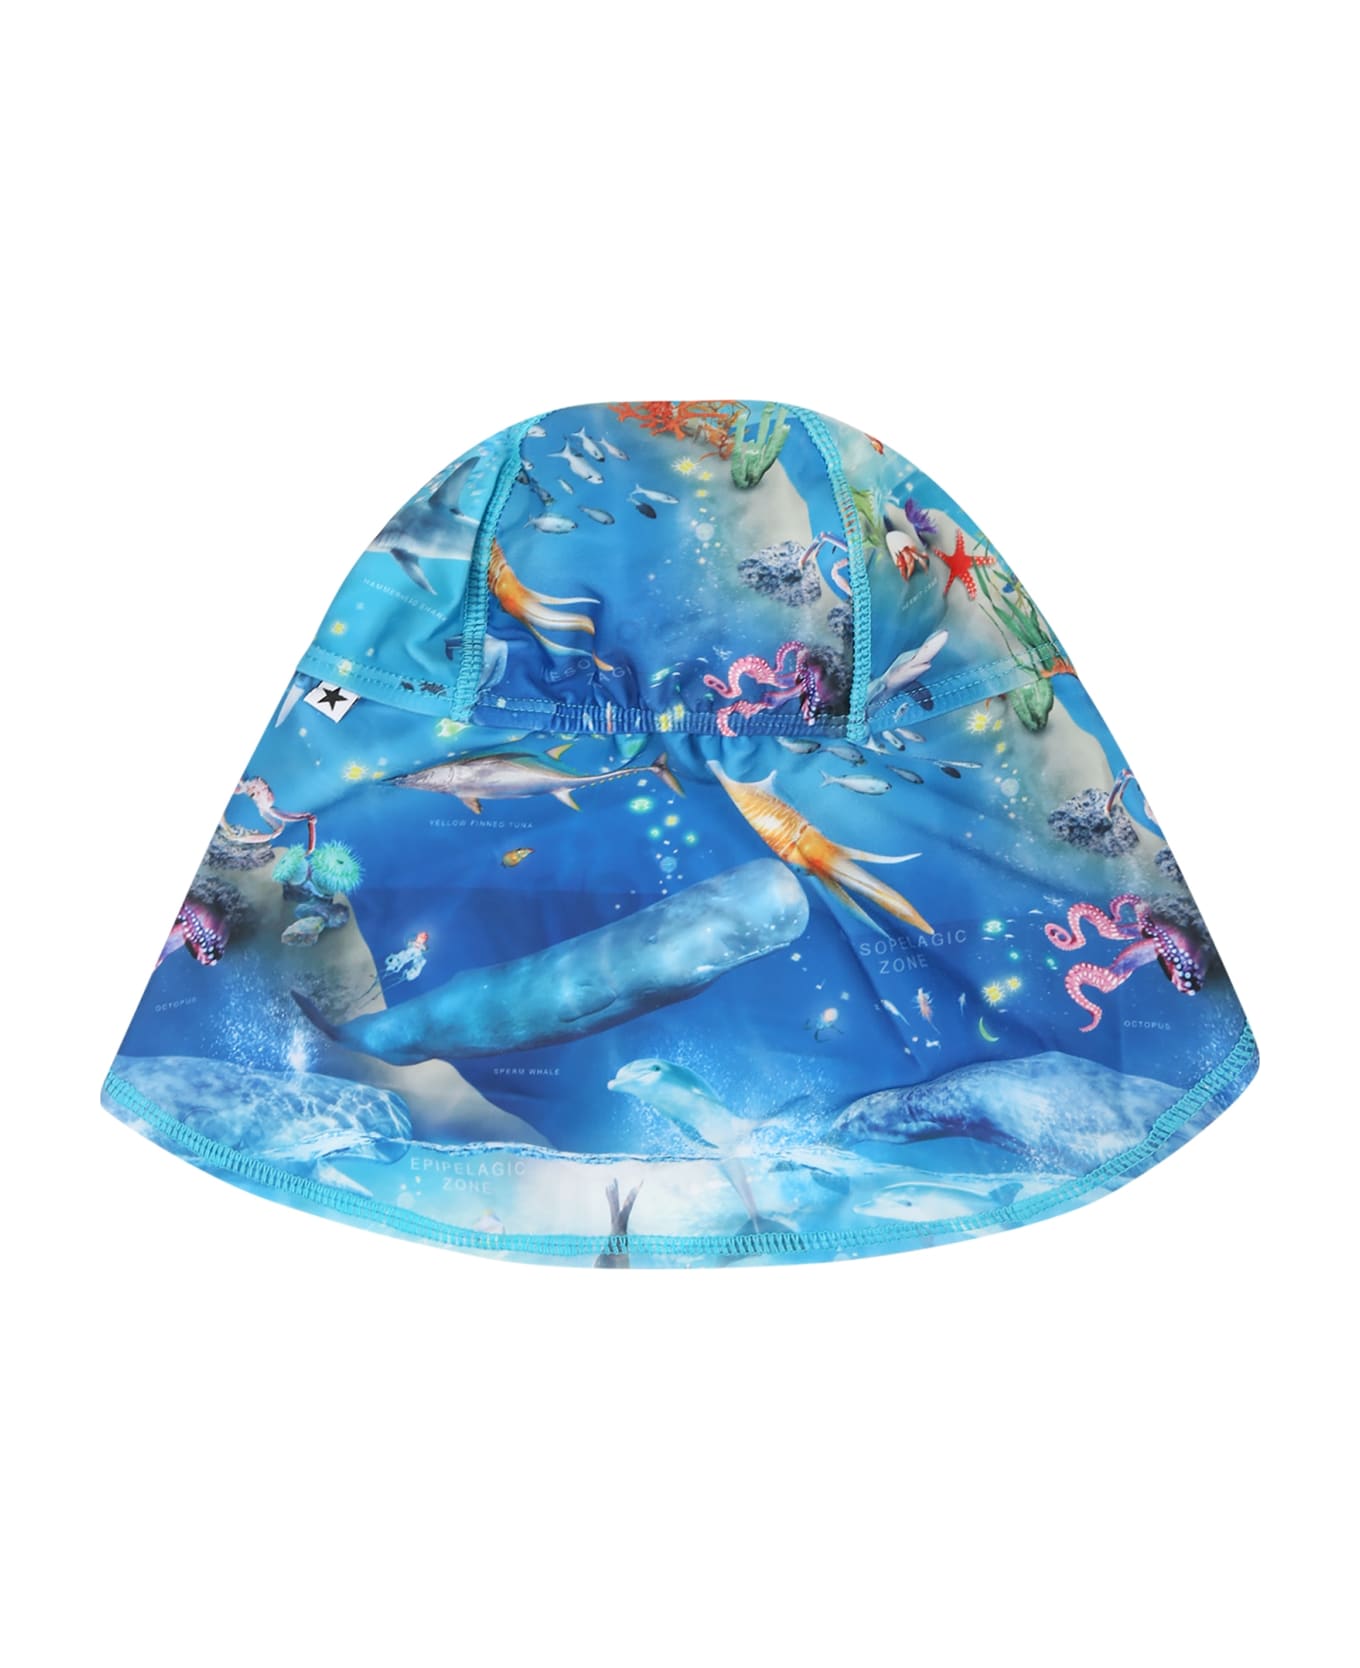 Molo Light Blue Hat For Baby Boy With Marine Animals - Light Blue アクセサリー＆ギフト